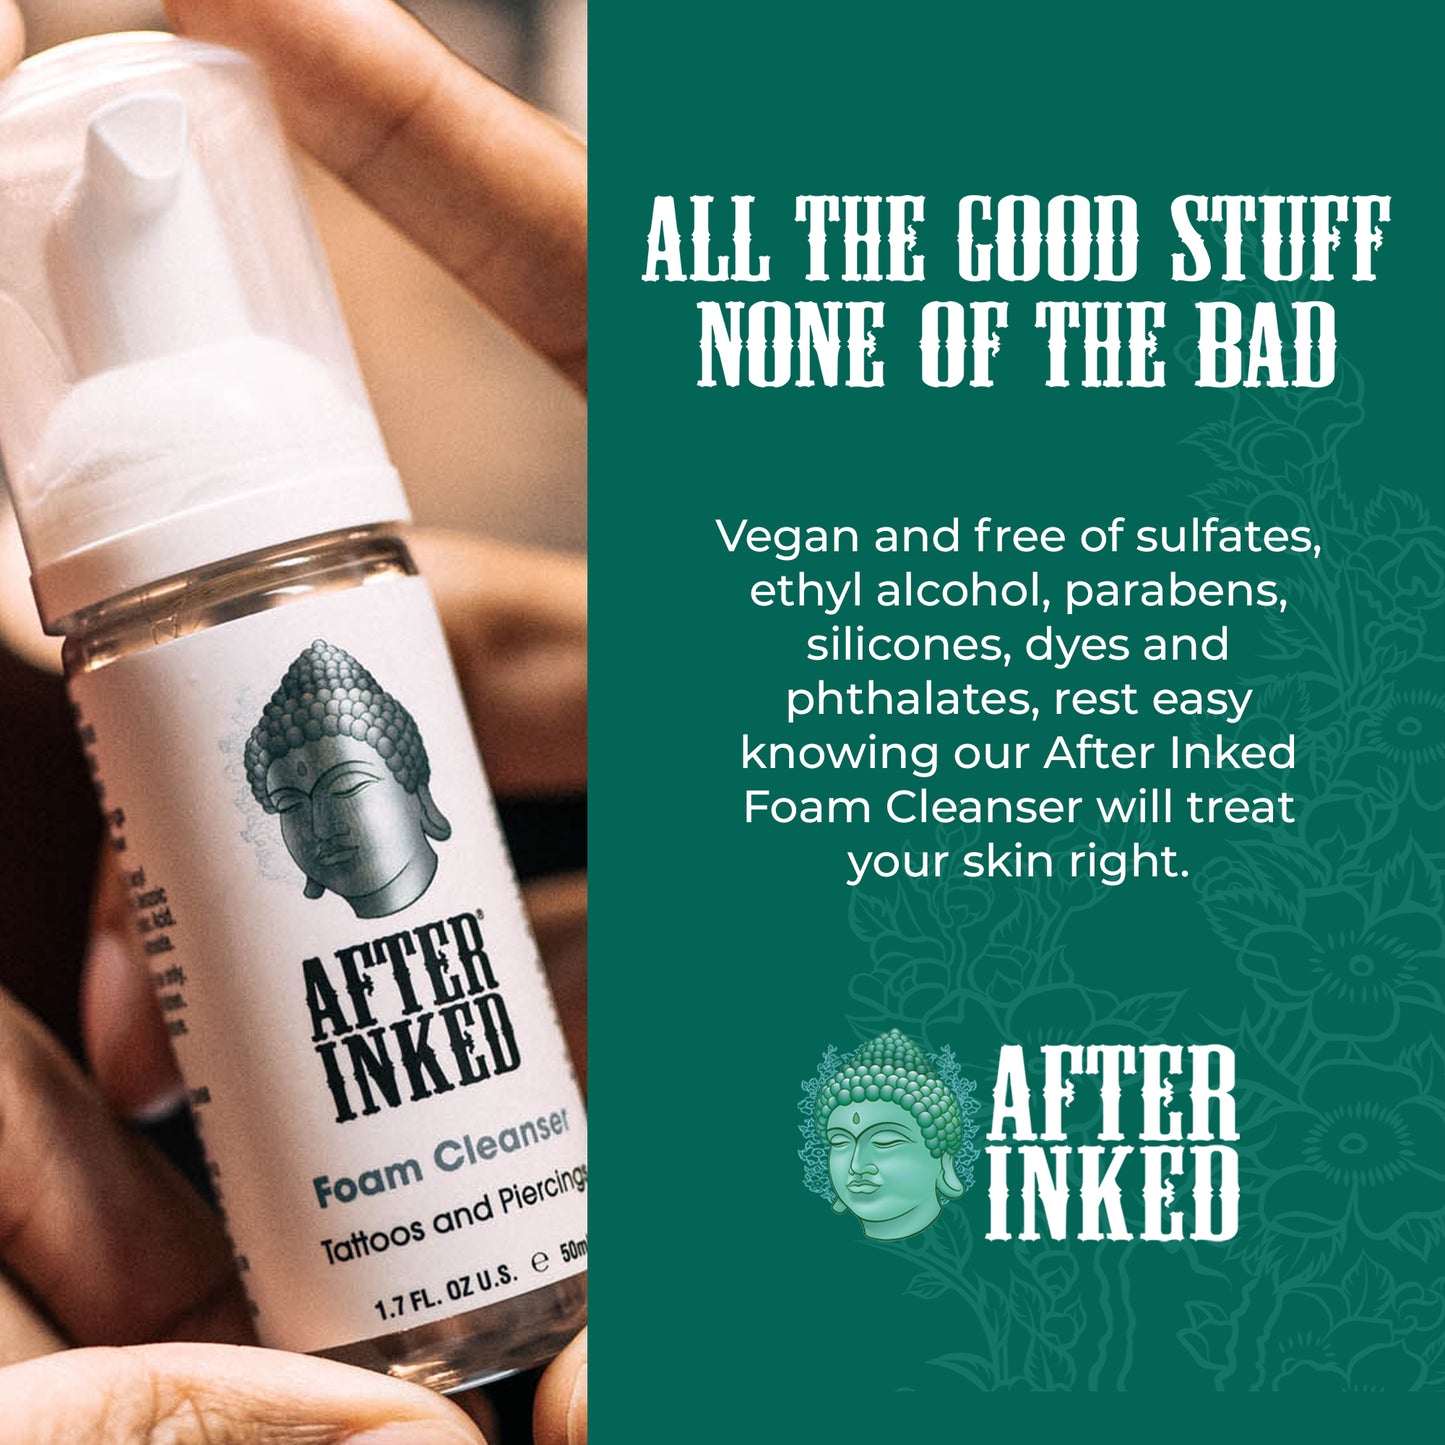 All the good stuff, none of the bad. Vegan and free of sulfates, ethyl alcohol, parabens, silicones, dyes and phthalates, rest easy knowing our After Inked Foam Cleanser will treat your skin right.